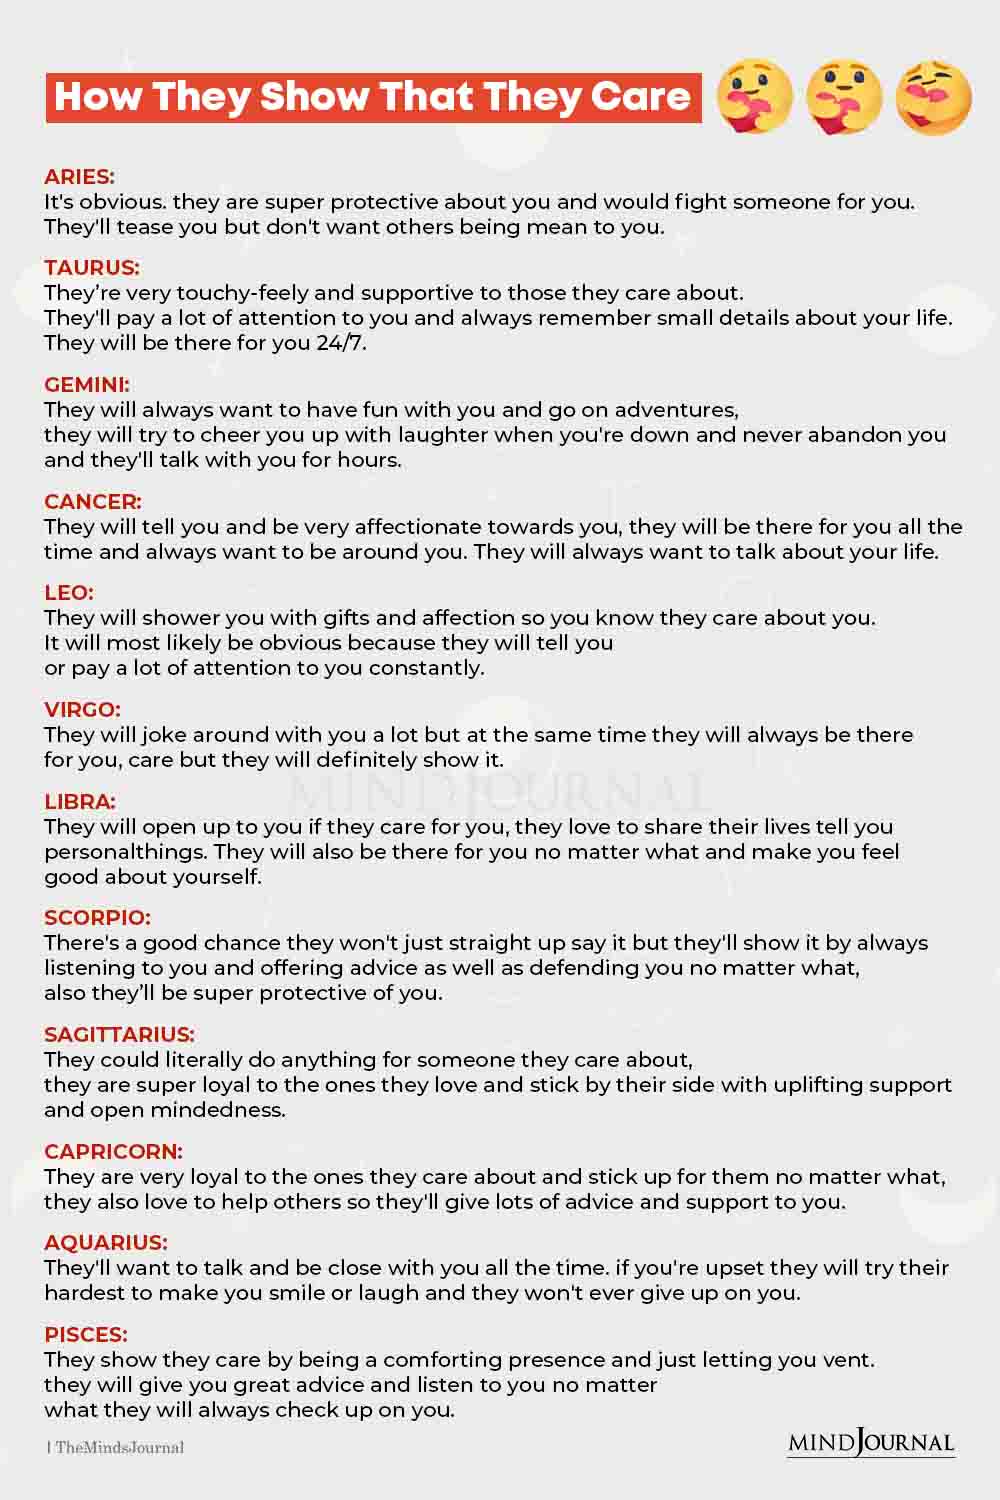 How Zodiac Signs Show That They Care